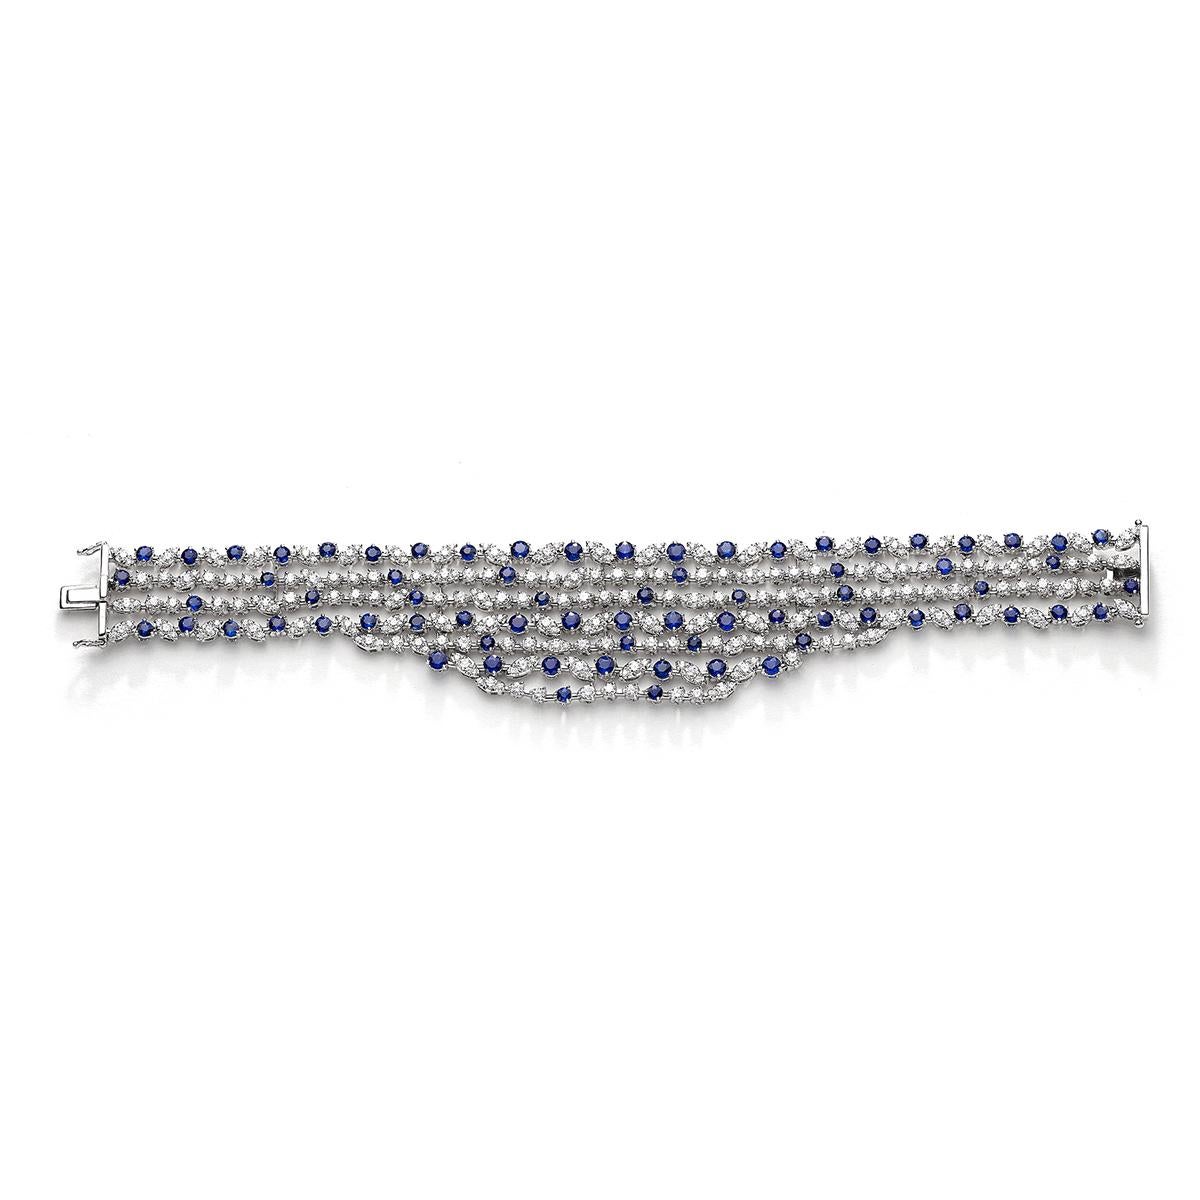 Bracelet in 18kt white gold set with 72 sapphires 9.40 cts and 302 diamonds 7.11 cts